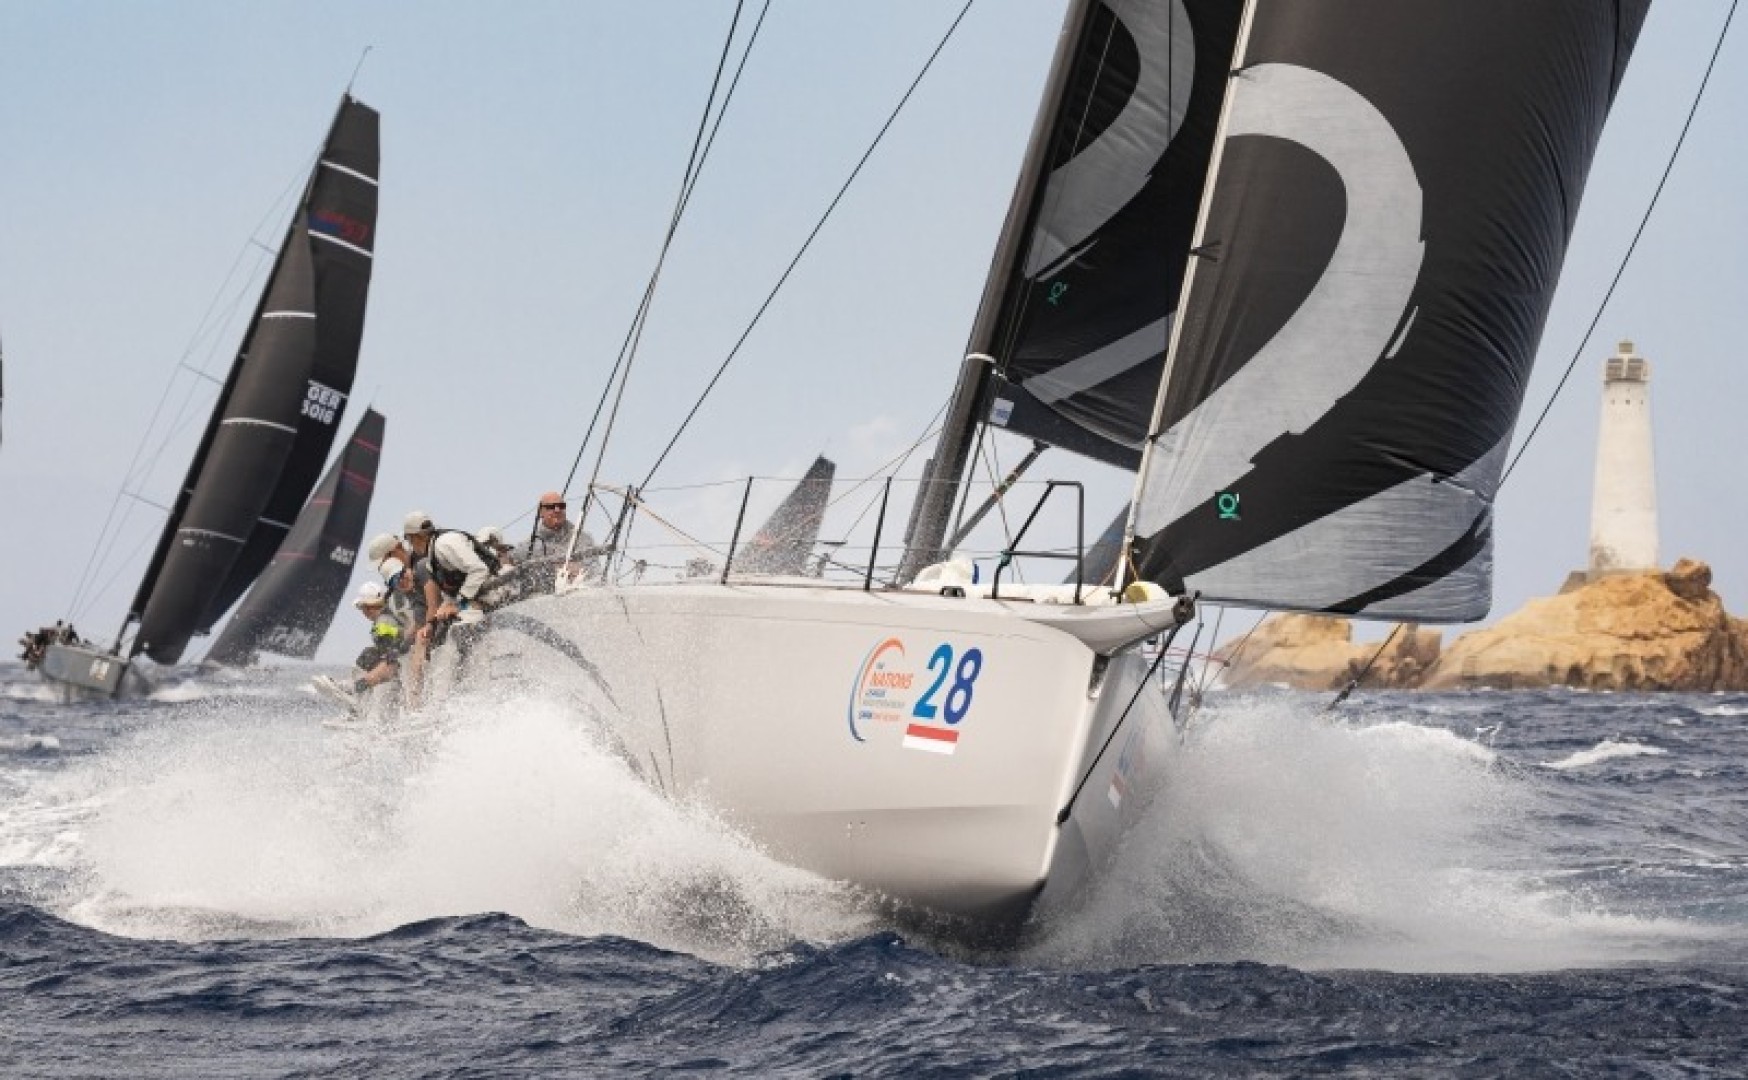 Moonlight, winner of the day in the ClubSwan 50 class, rounds Monaci island, The Nations Trophy - Swan One Design. ﻿Photo credits: ClubSwan/Studio Borlenghi